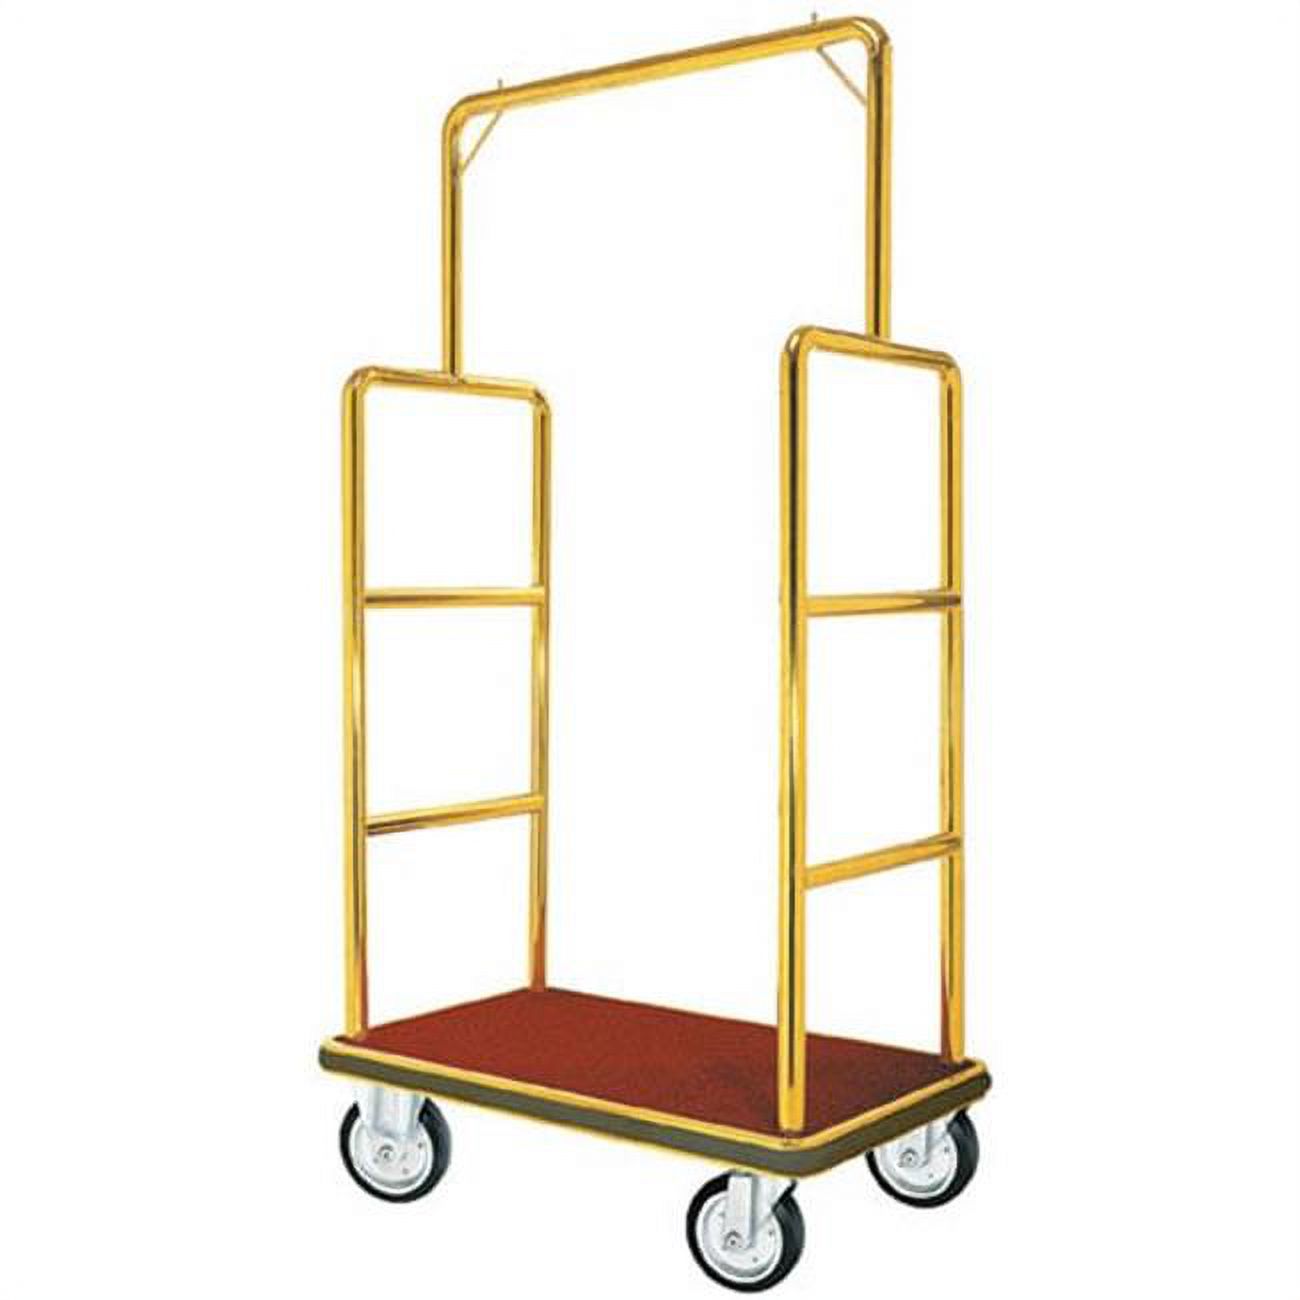 Aarco LC-1C Bellman Luggage Cart - Chrome w/ Carpeted Bed and Hanger Rail - image 1 of 1